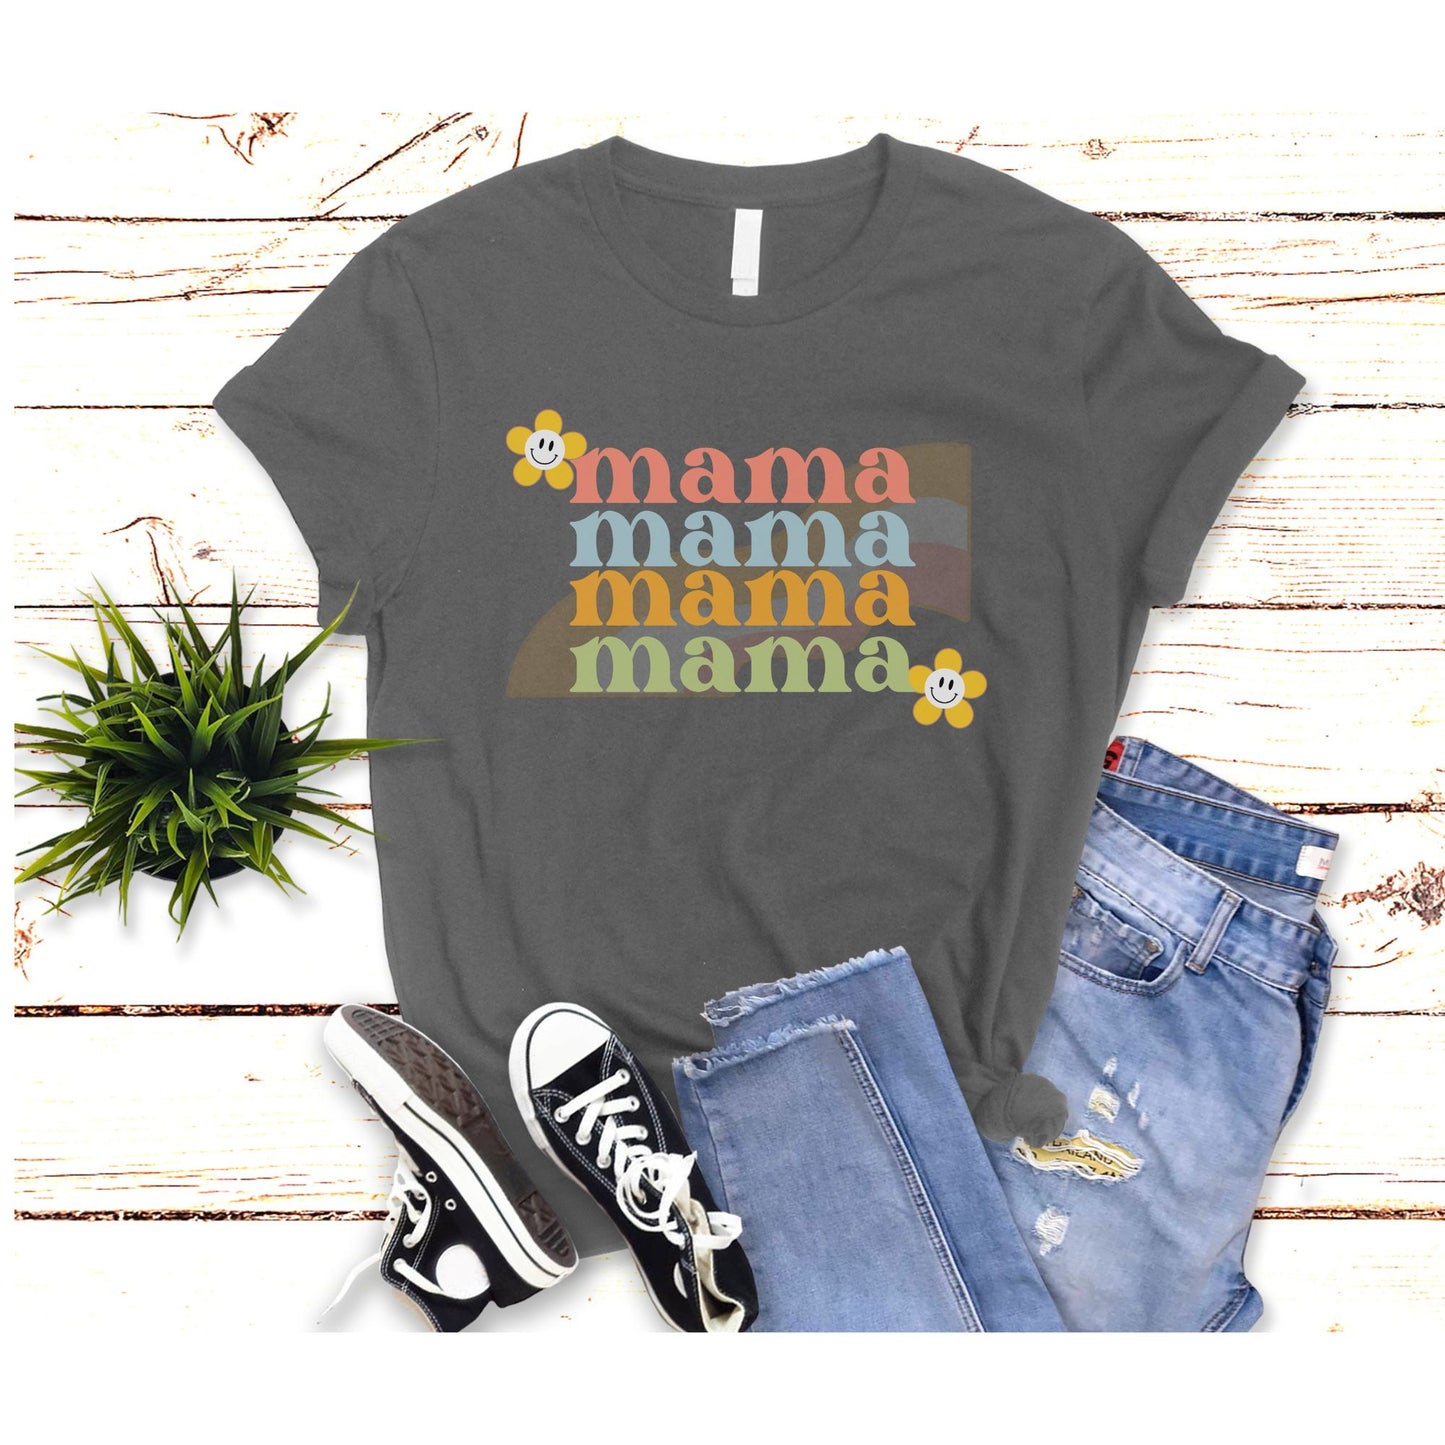 Mother's Day T Shirt, New Mommy Shirt, Mom Gift Shirt, Mama shirt, Wife gift, Mama tee, Grandma Shirt, Gift for Grandma, Mothers Day Gift